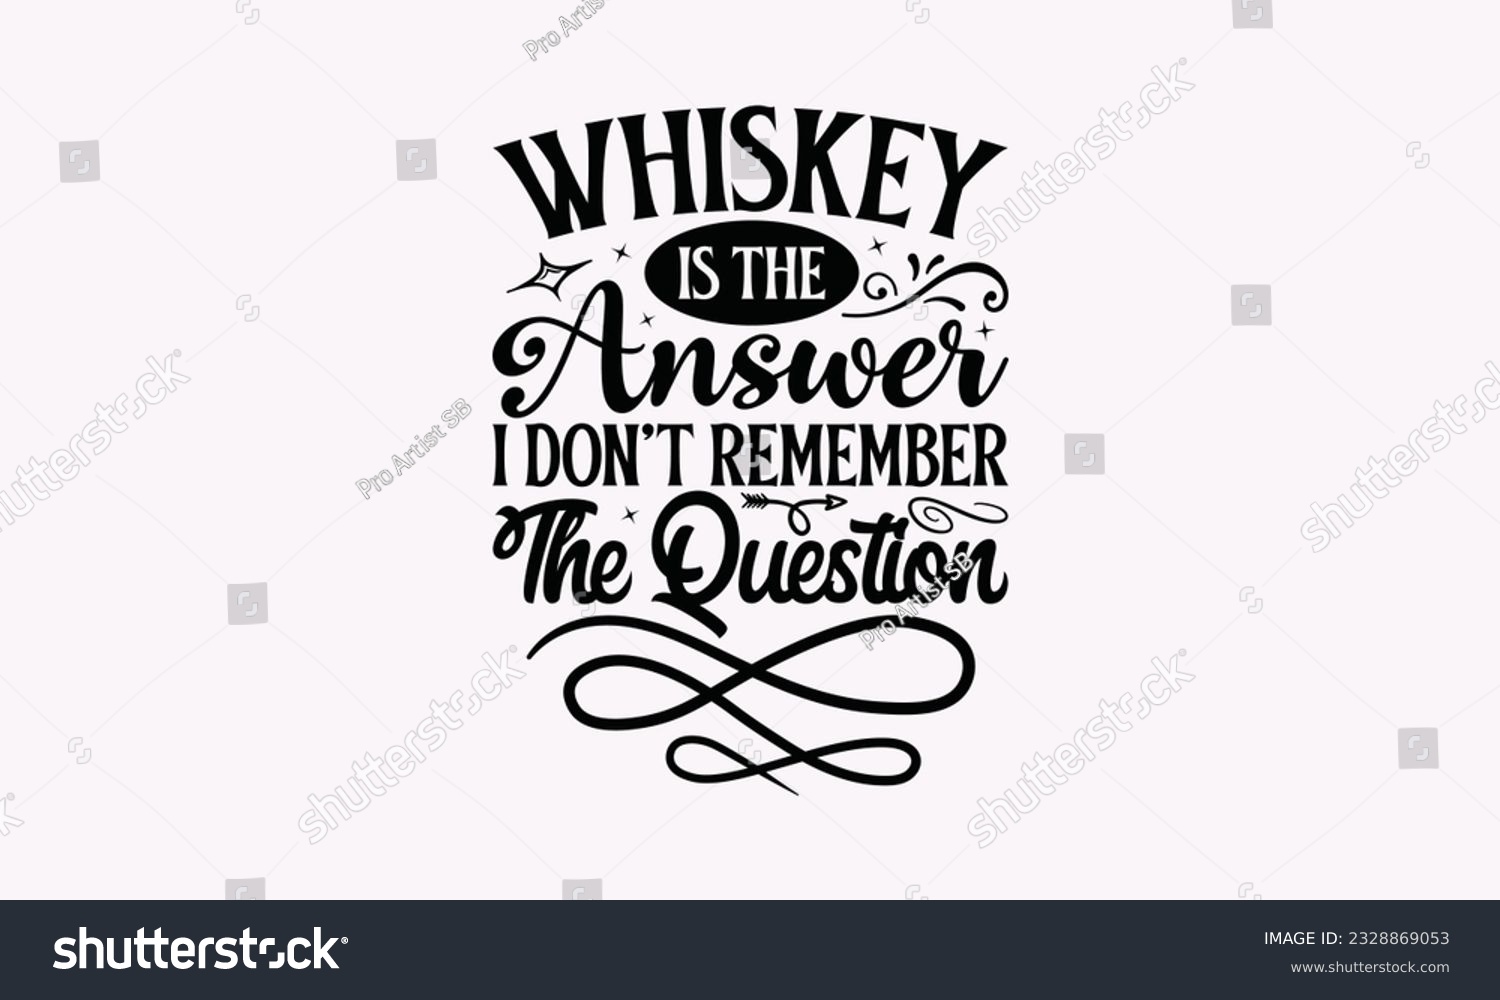 SVG of Whiskey Is The Answer I Don’t Remember The Question - Alcohol SVG Design, Drink Quotes, Calligraphy graphic design, Typography poster with old style camera and quote. svg